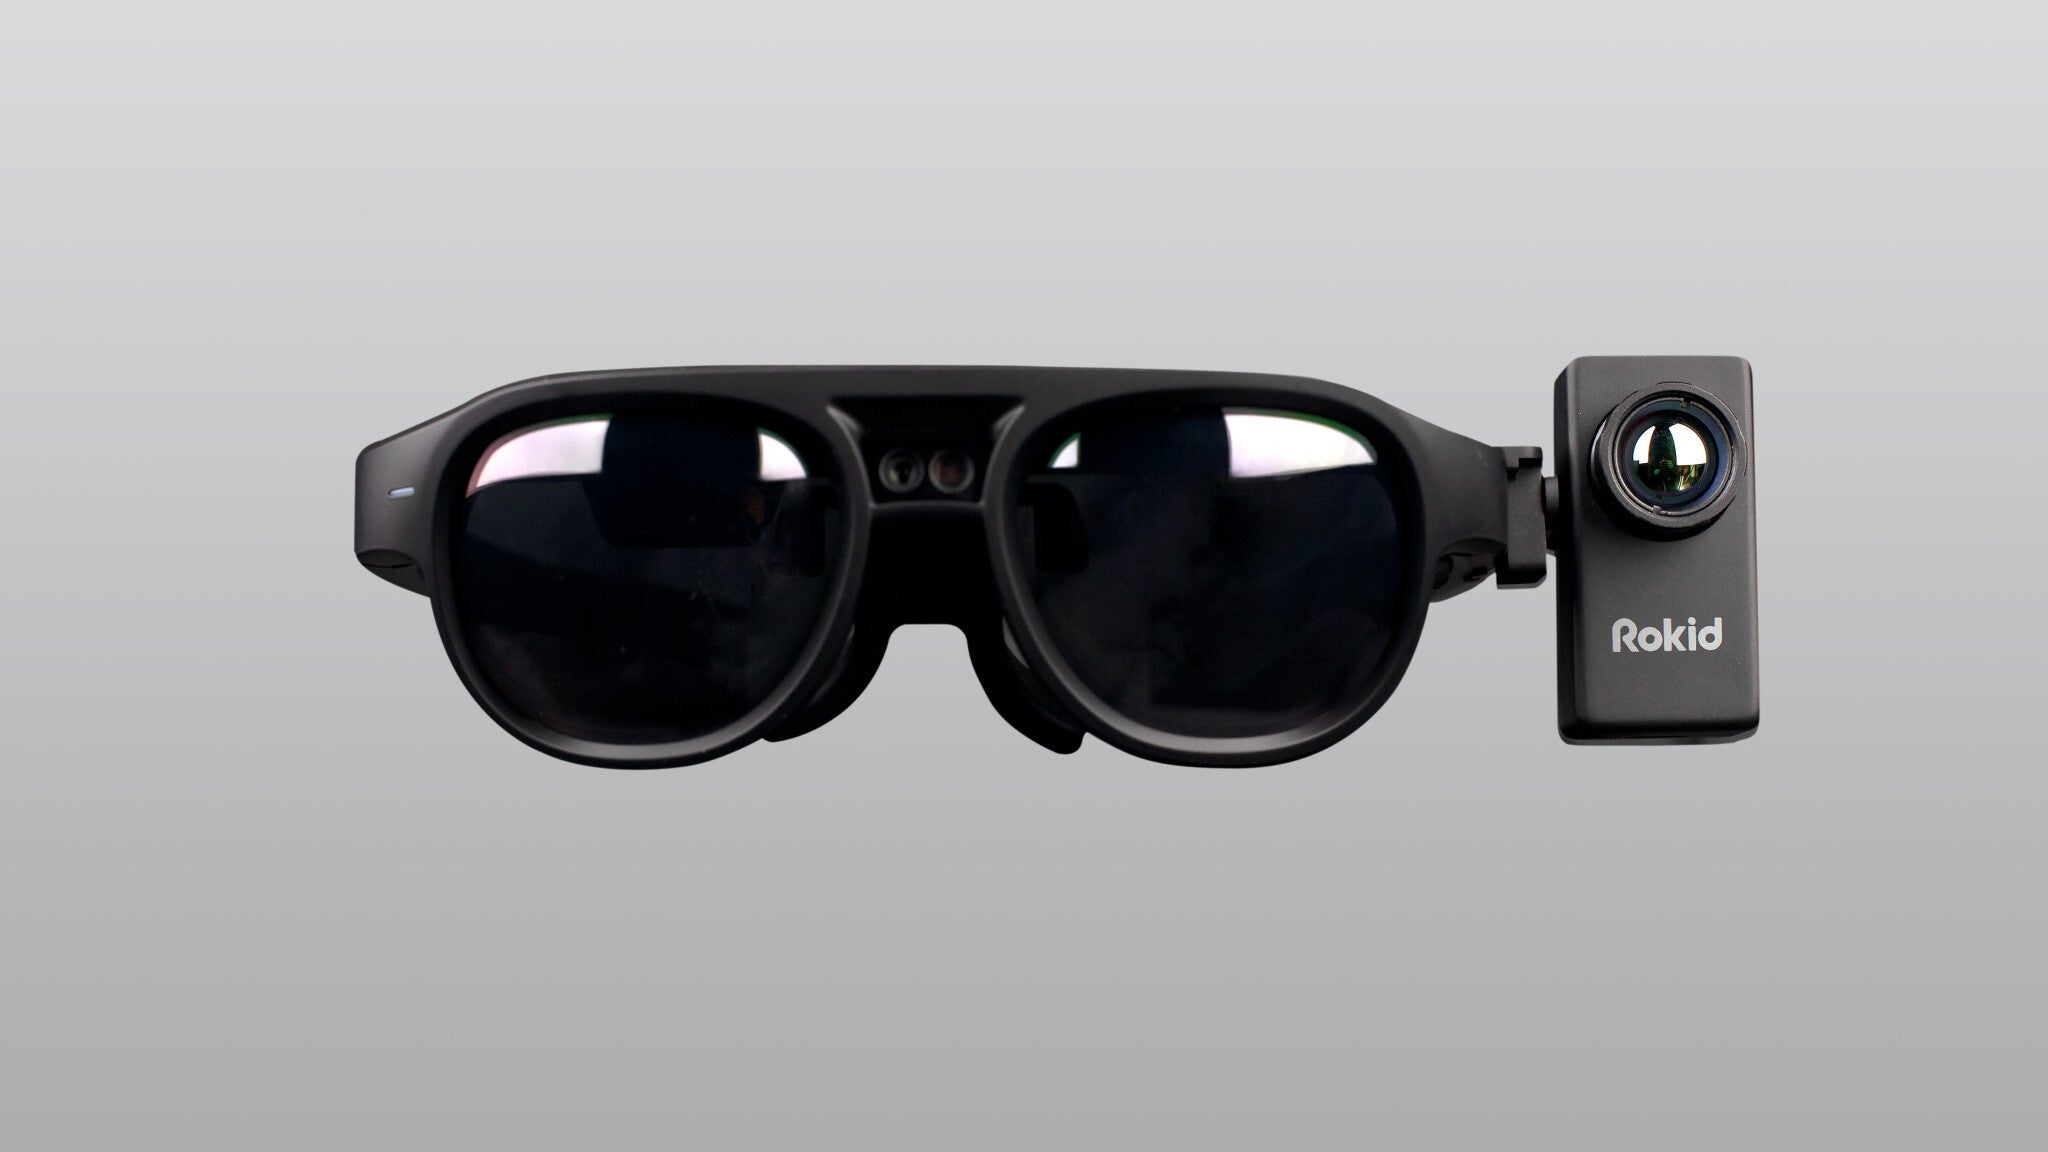 Rokid T1 Thermal Smart Glasses - COVID-19 detection smart glasses are coming to the US